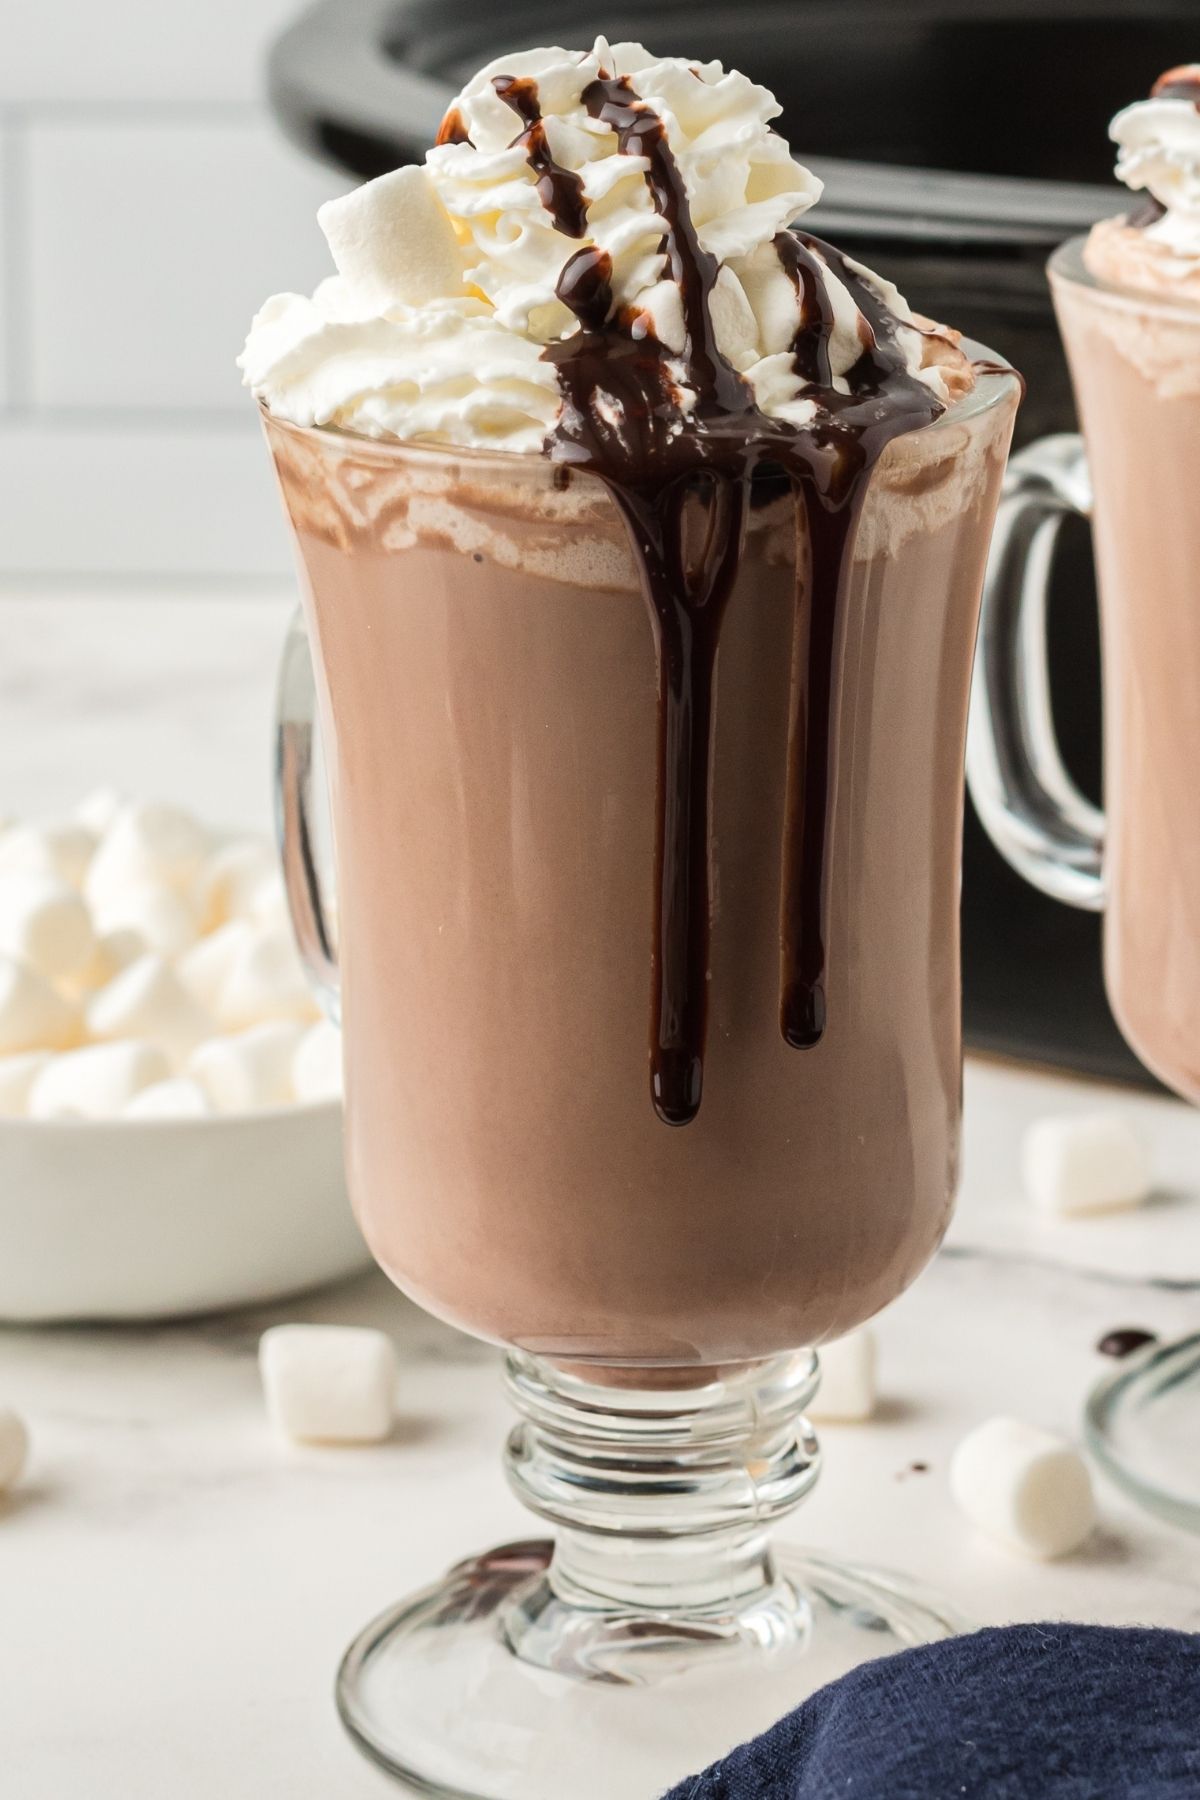 mug with hot chocolate, whipped cream, and hot chocolate sauce dripping down the side